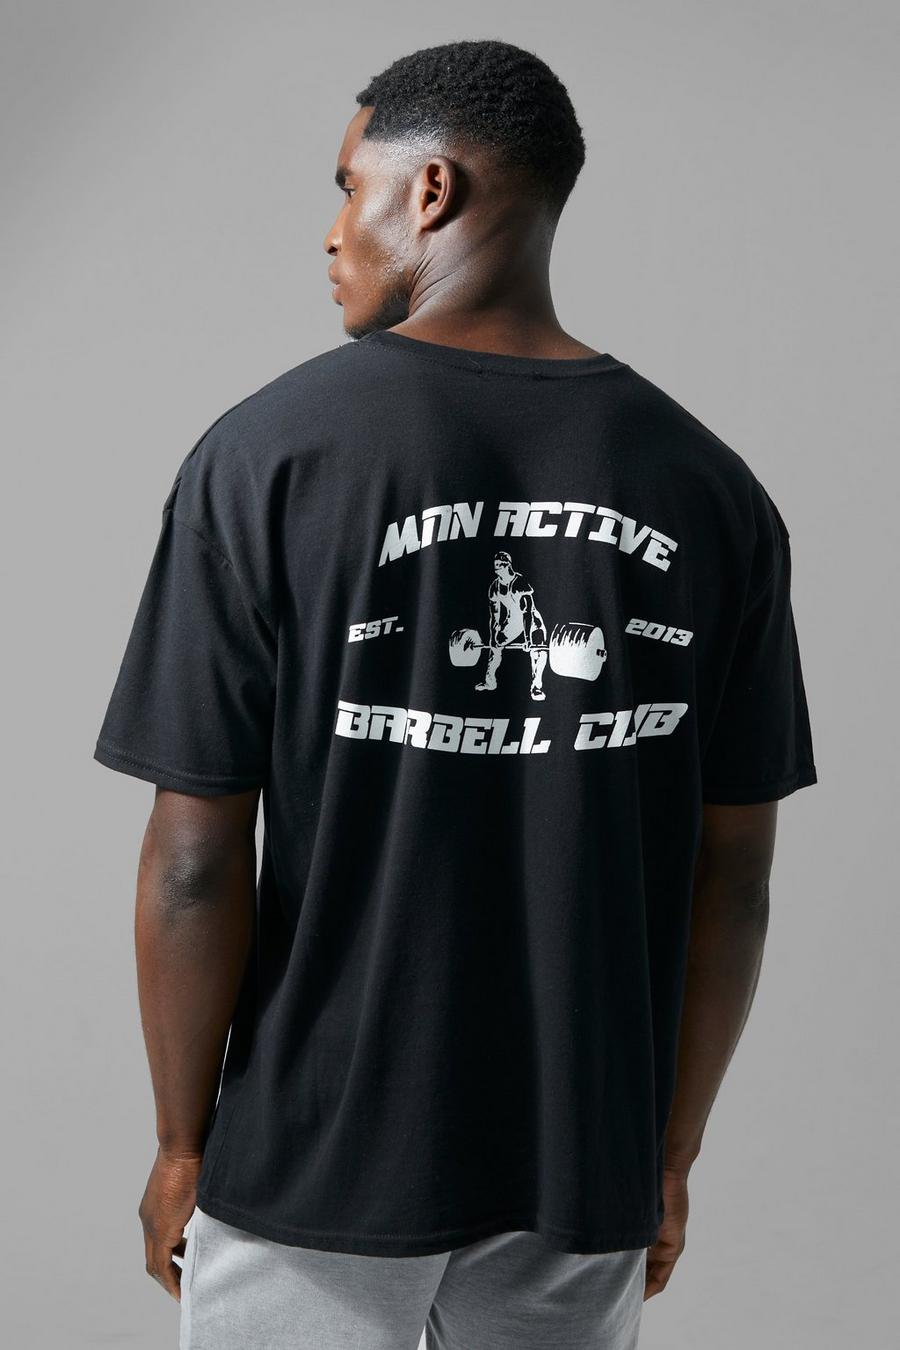 Black Man Active Oversized Fitness Barbell Club T-Shirt